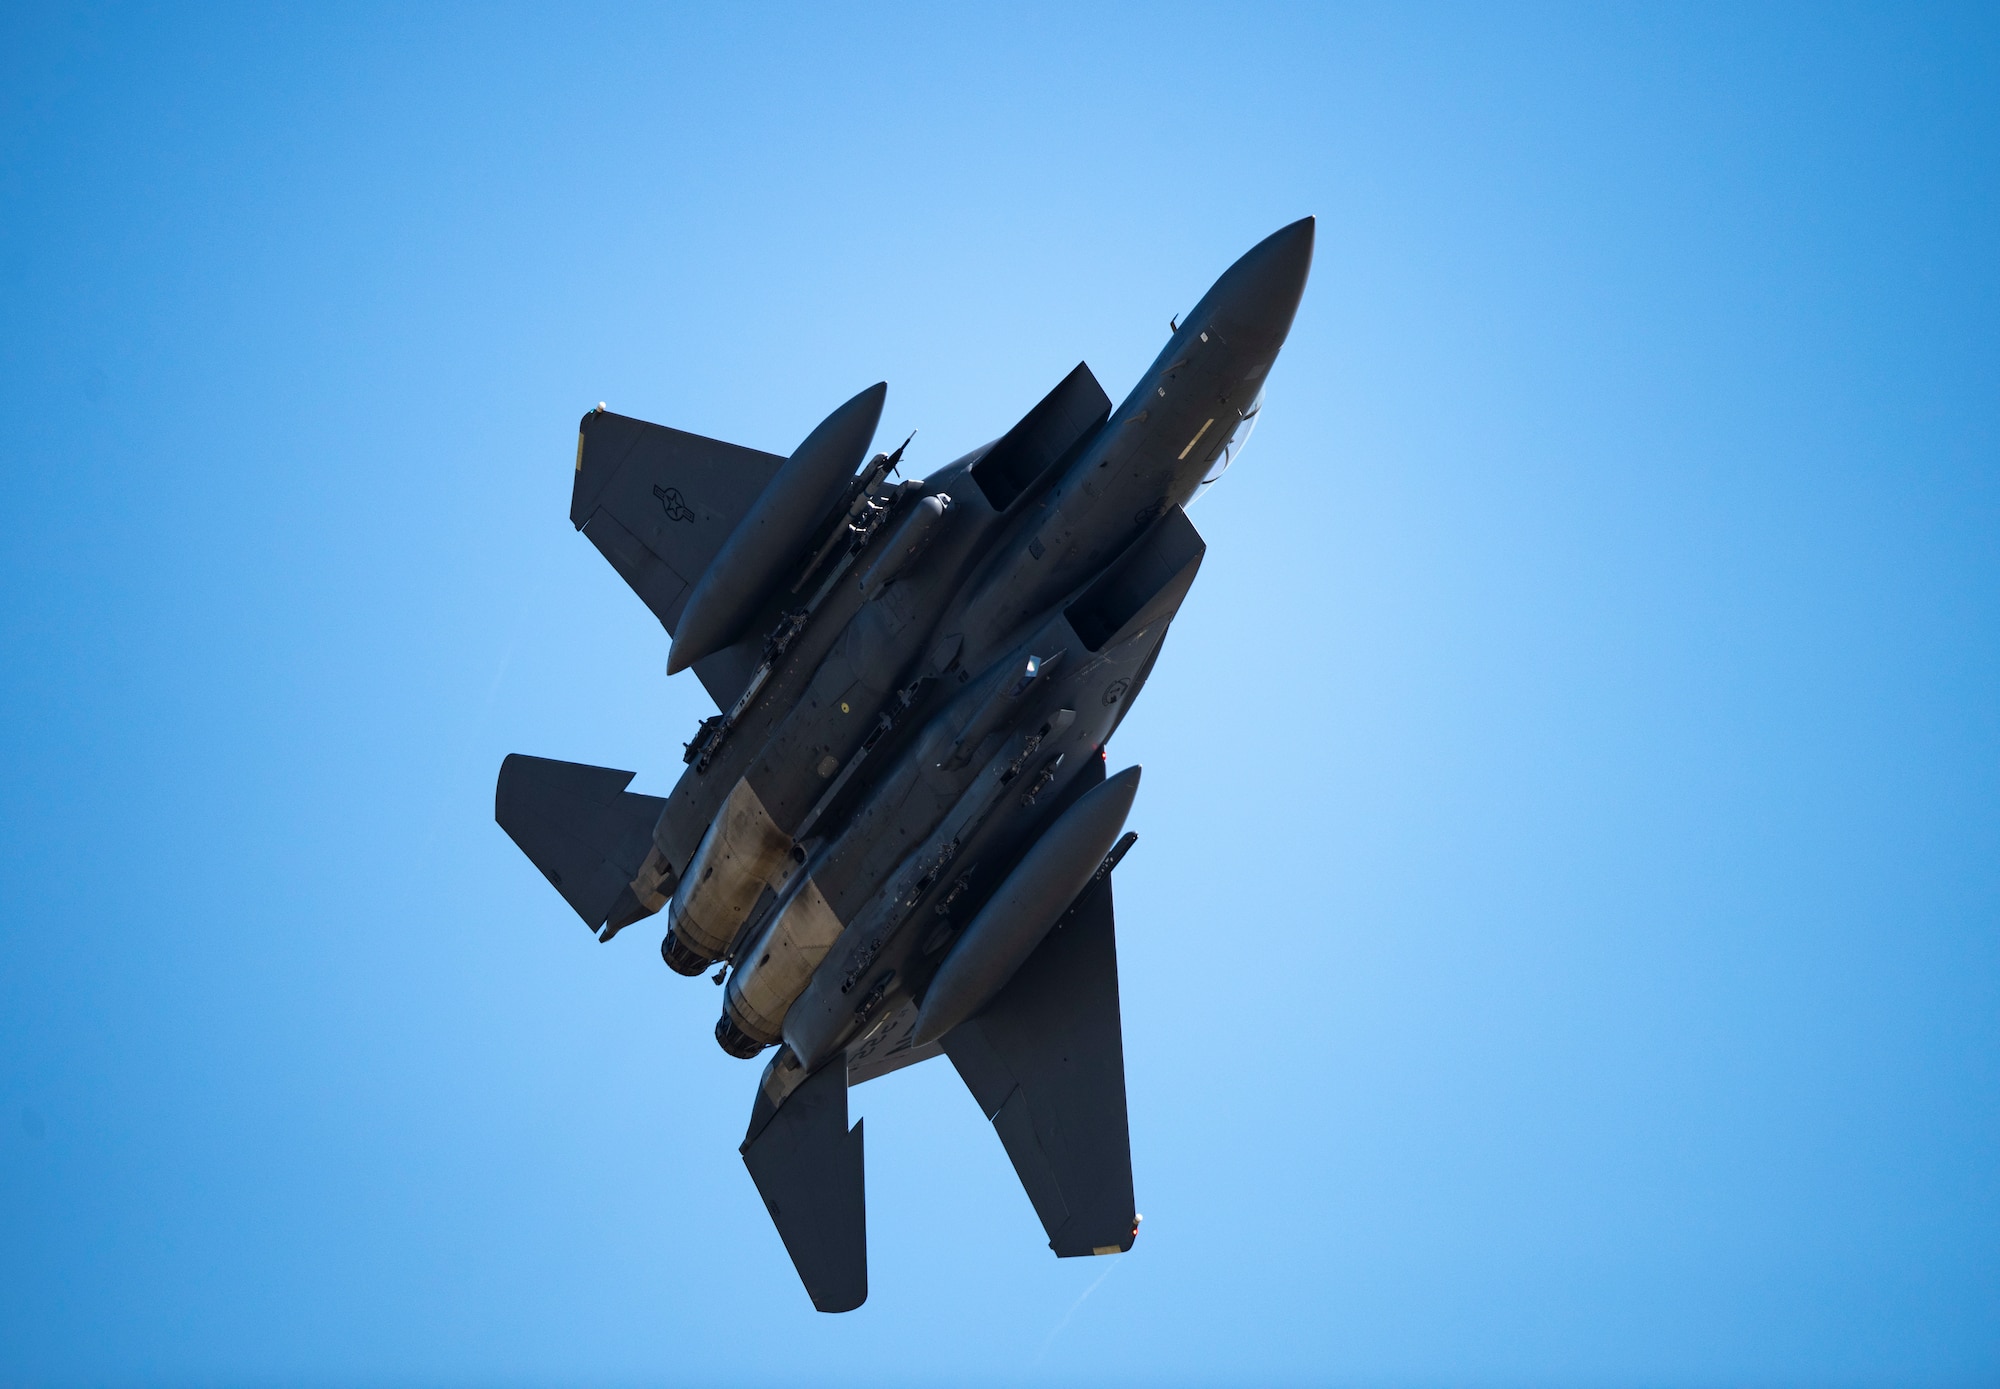 An F-15E Strike Eagle assigned to the 492nd Fighter Squadron performs a flight maneuver above Royal Air Force Lakenheath, England, April 15, 2020. Despite the current COVID-19 crisis, the 48th Fighter Wing has a critical mission of delivering combat air power when called upon that must continue. (U.S. Air Force photo by Airman 1st Class Madeline Herzog)